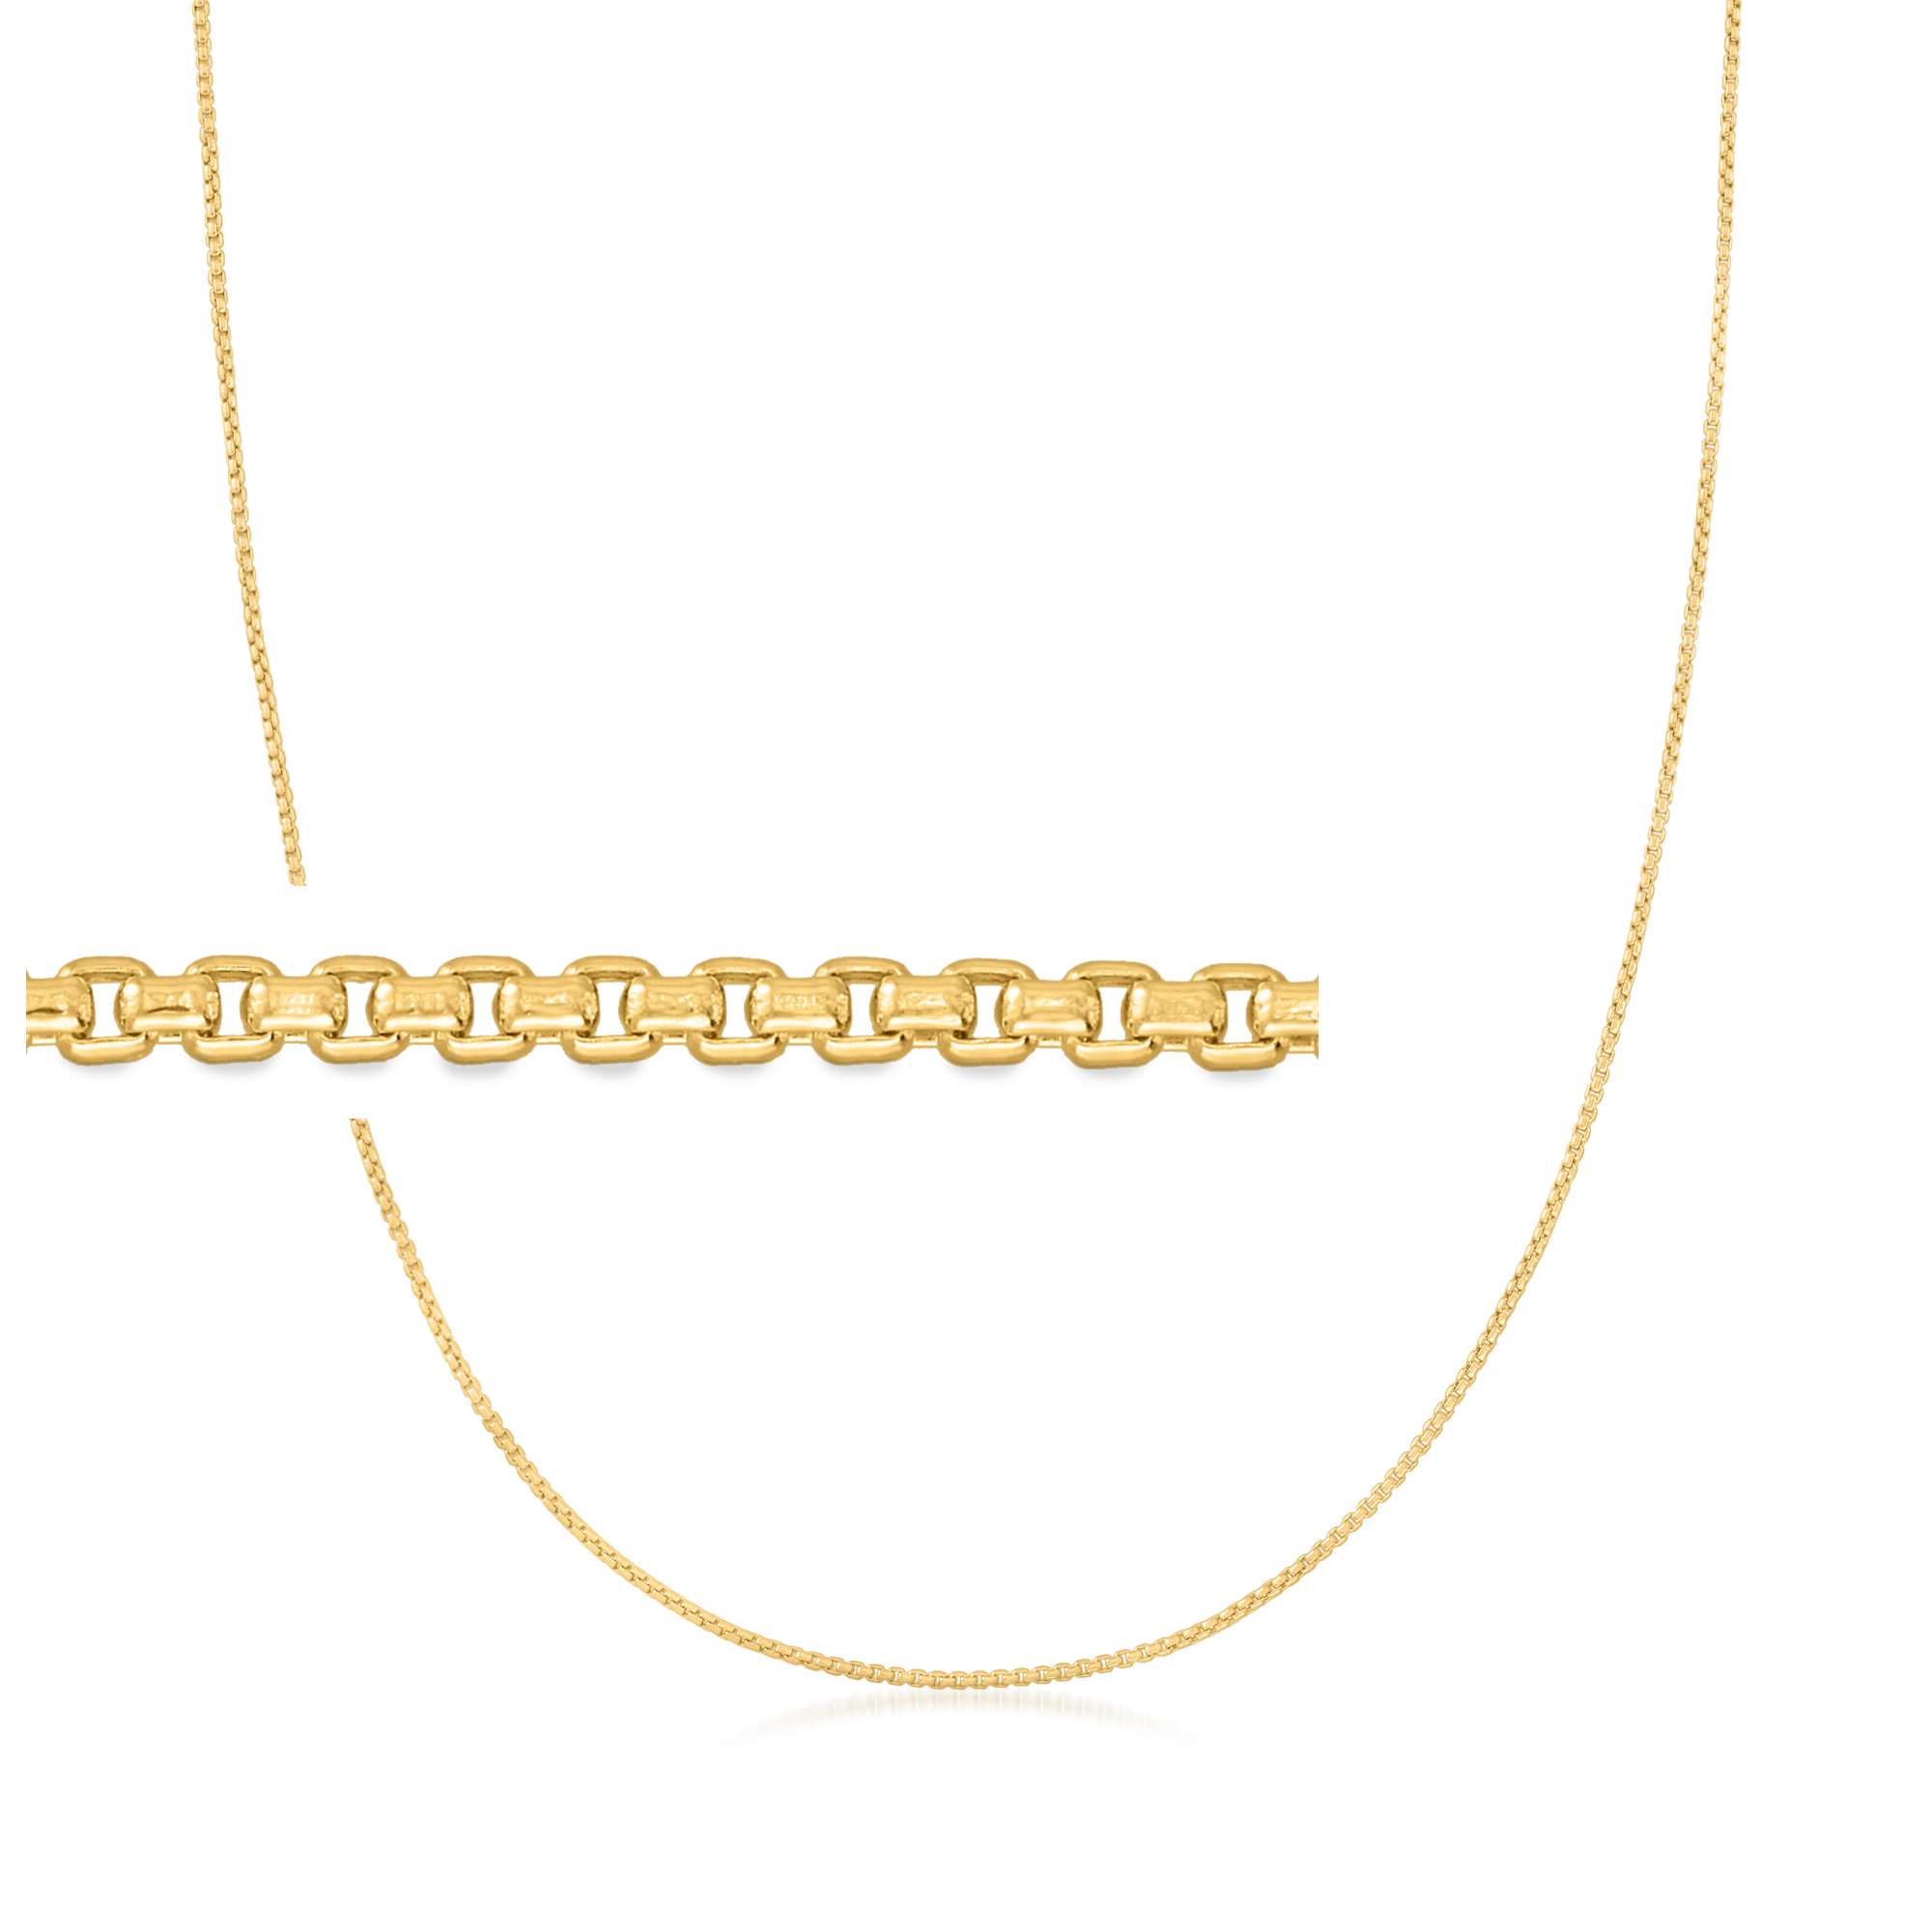 Ross-Simons - 4mm 14kt Yellow Gold Rope-Chain Necklace. 16